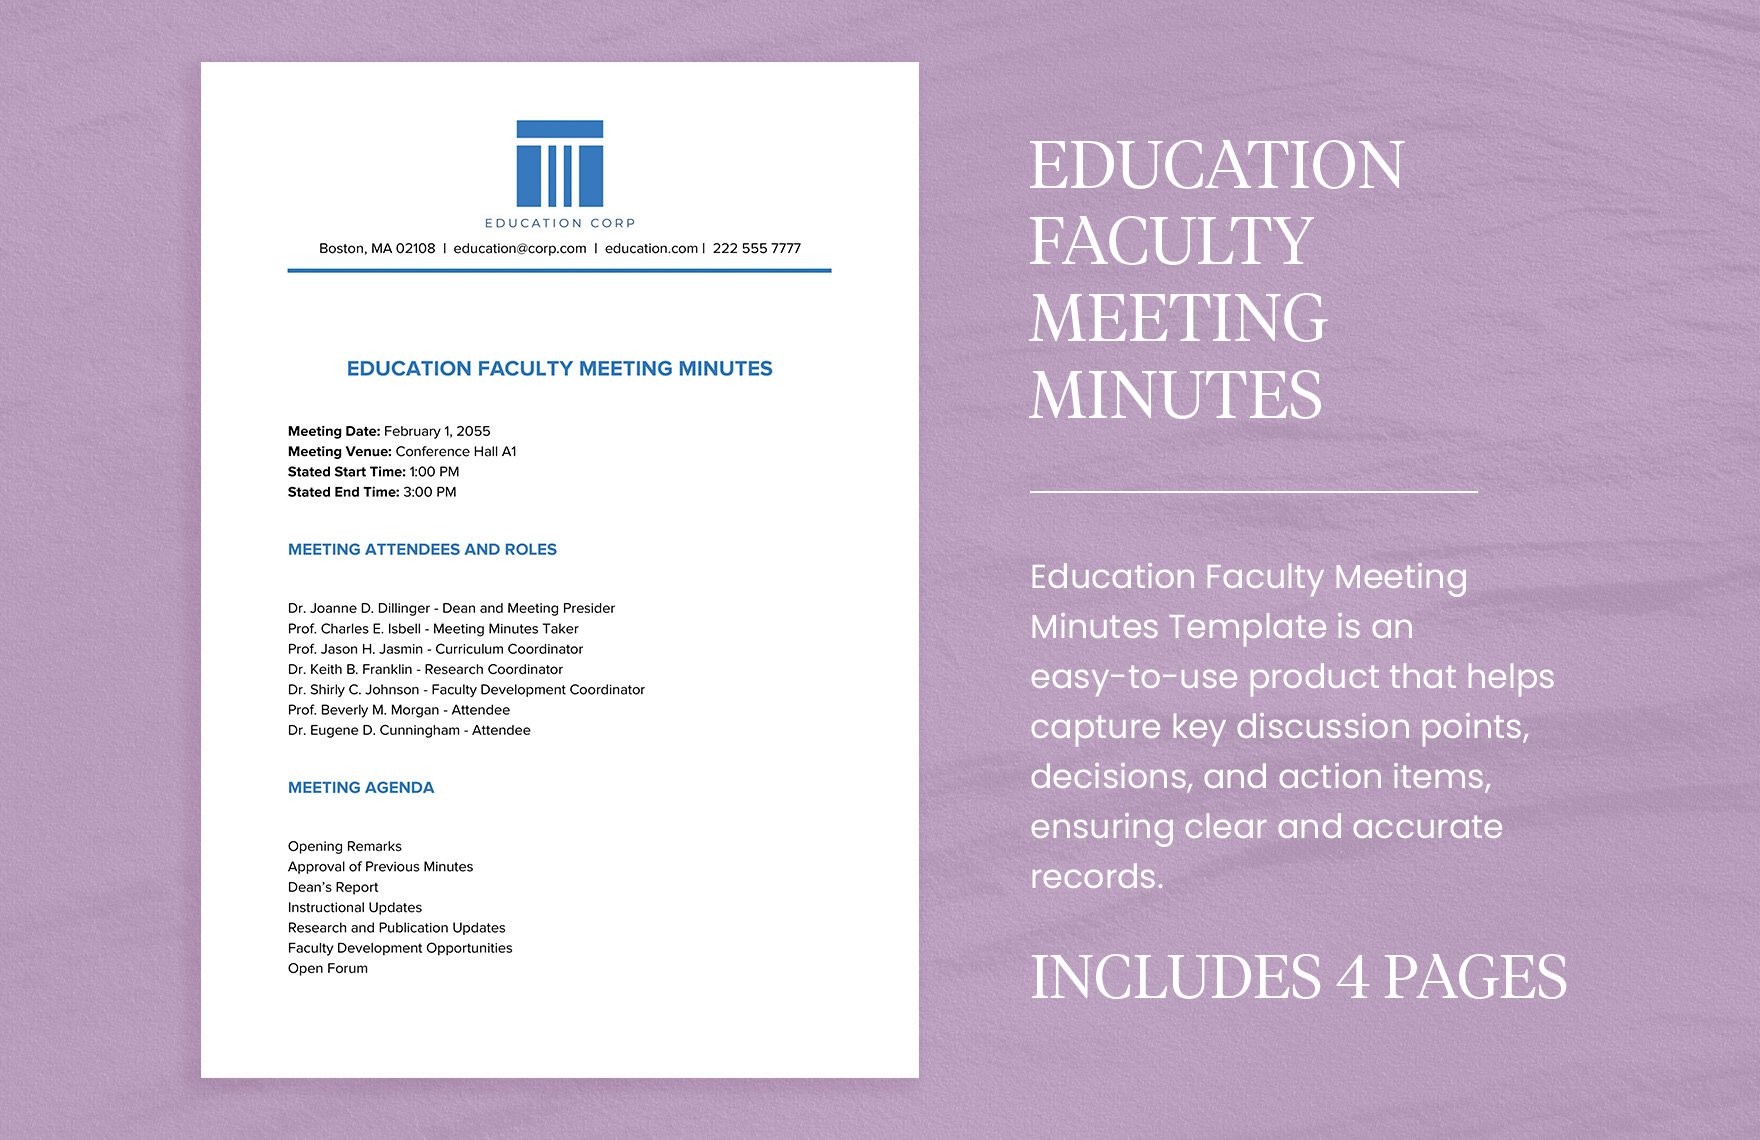 Education Faculty Meeting Minutes